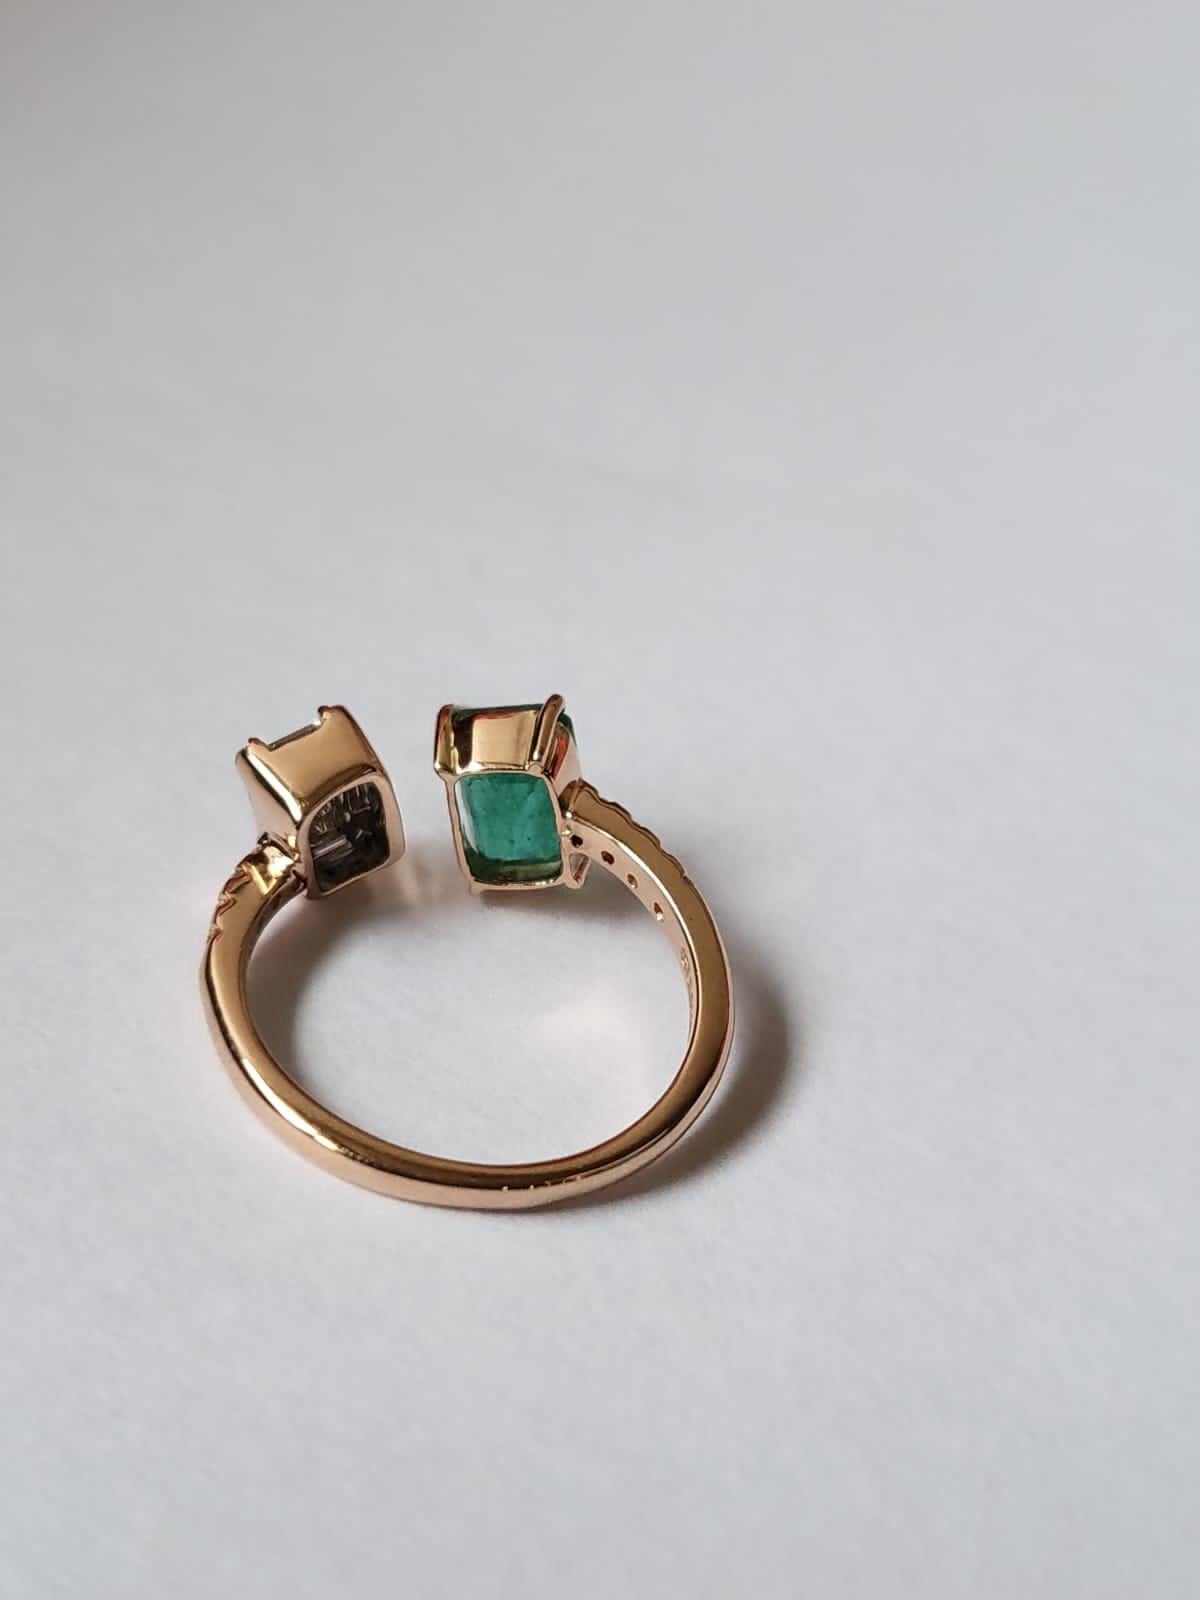 Set in 18K Rose Gold, natural Zambian Emerald & Diamonds Engagement/Cluster Ring For Sale 1